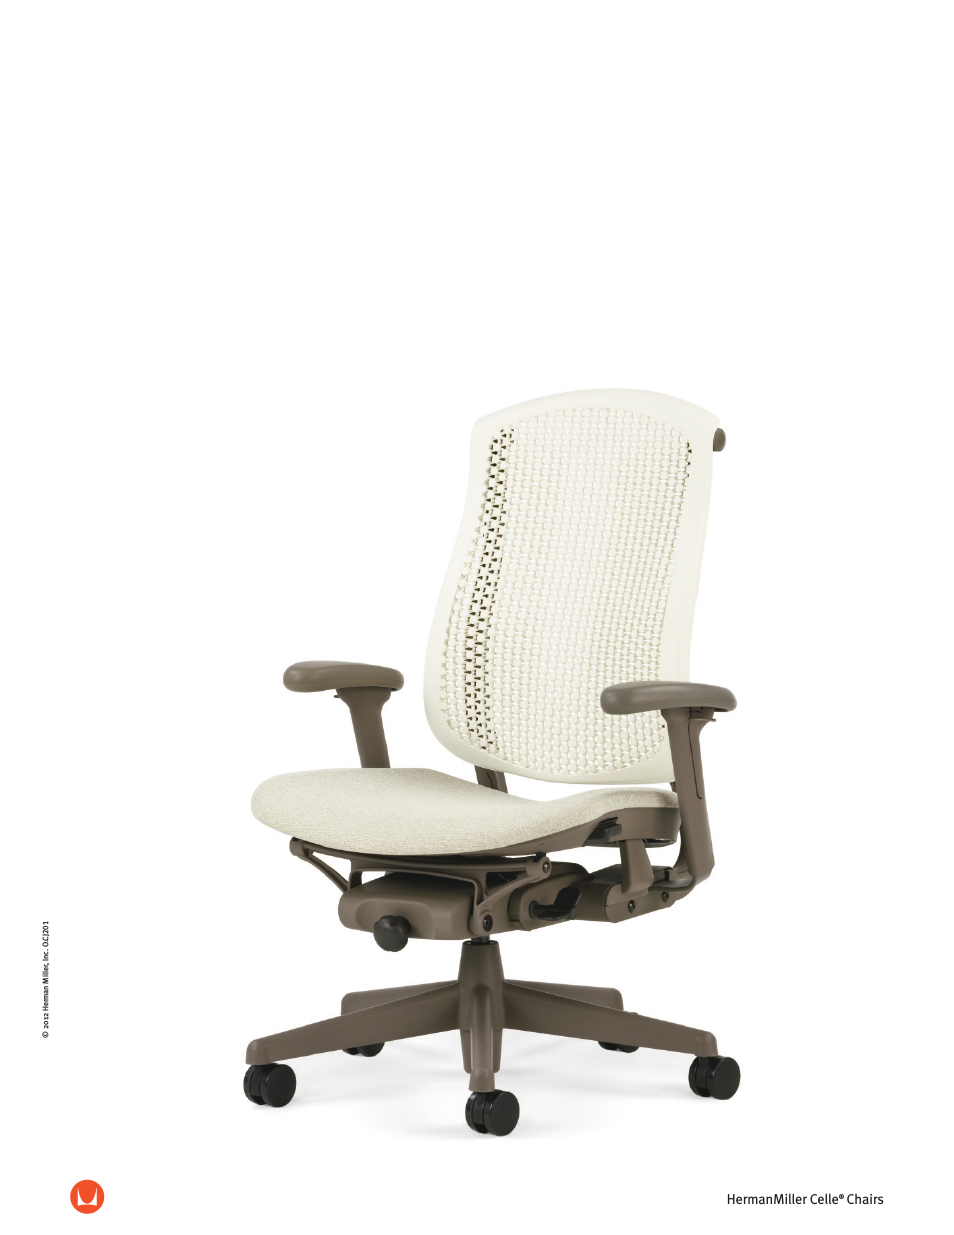 Celle Chairs - Product sheet